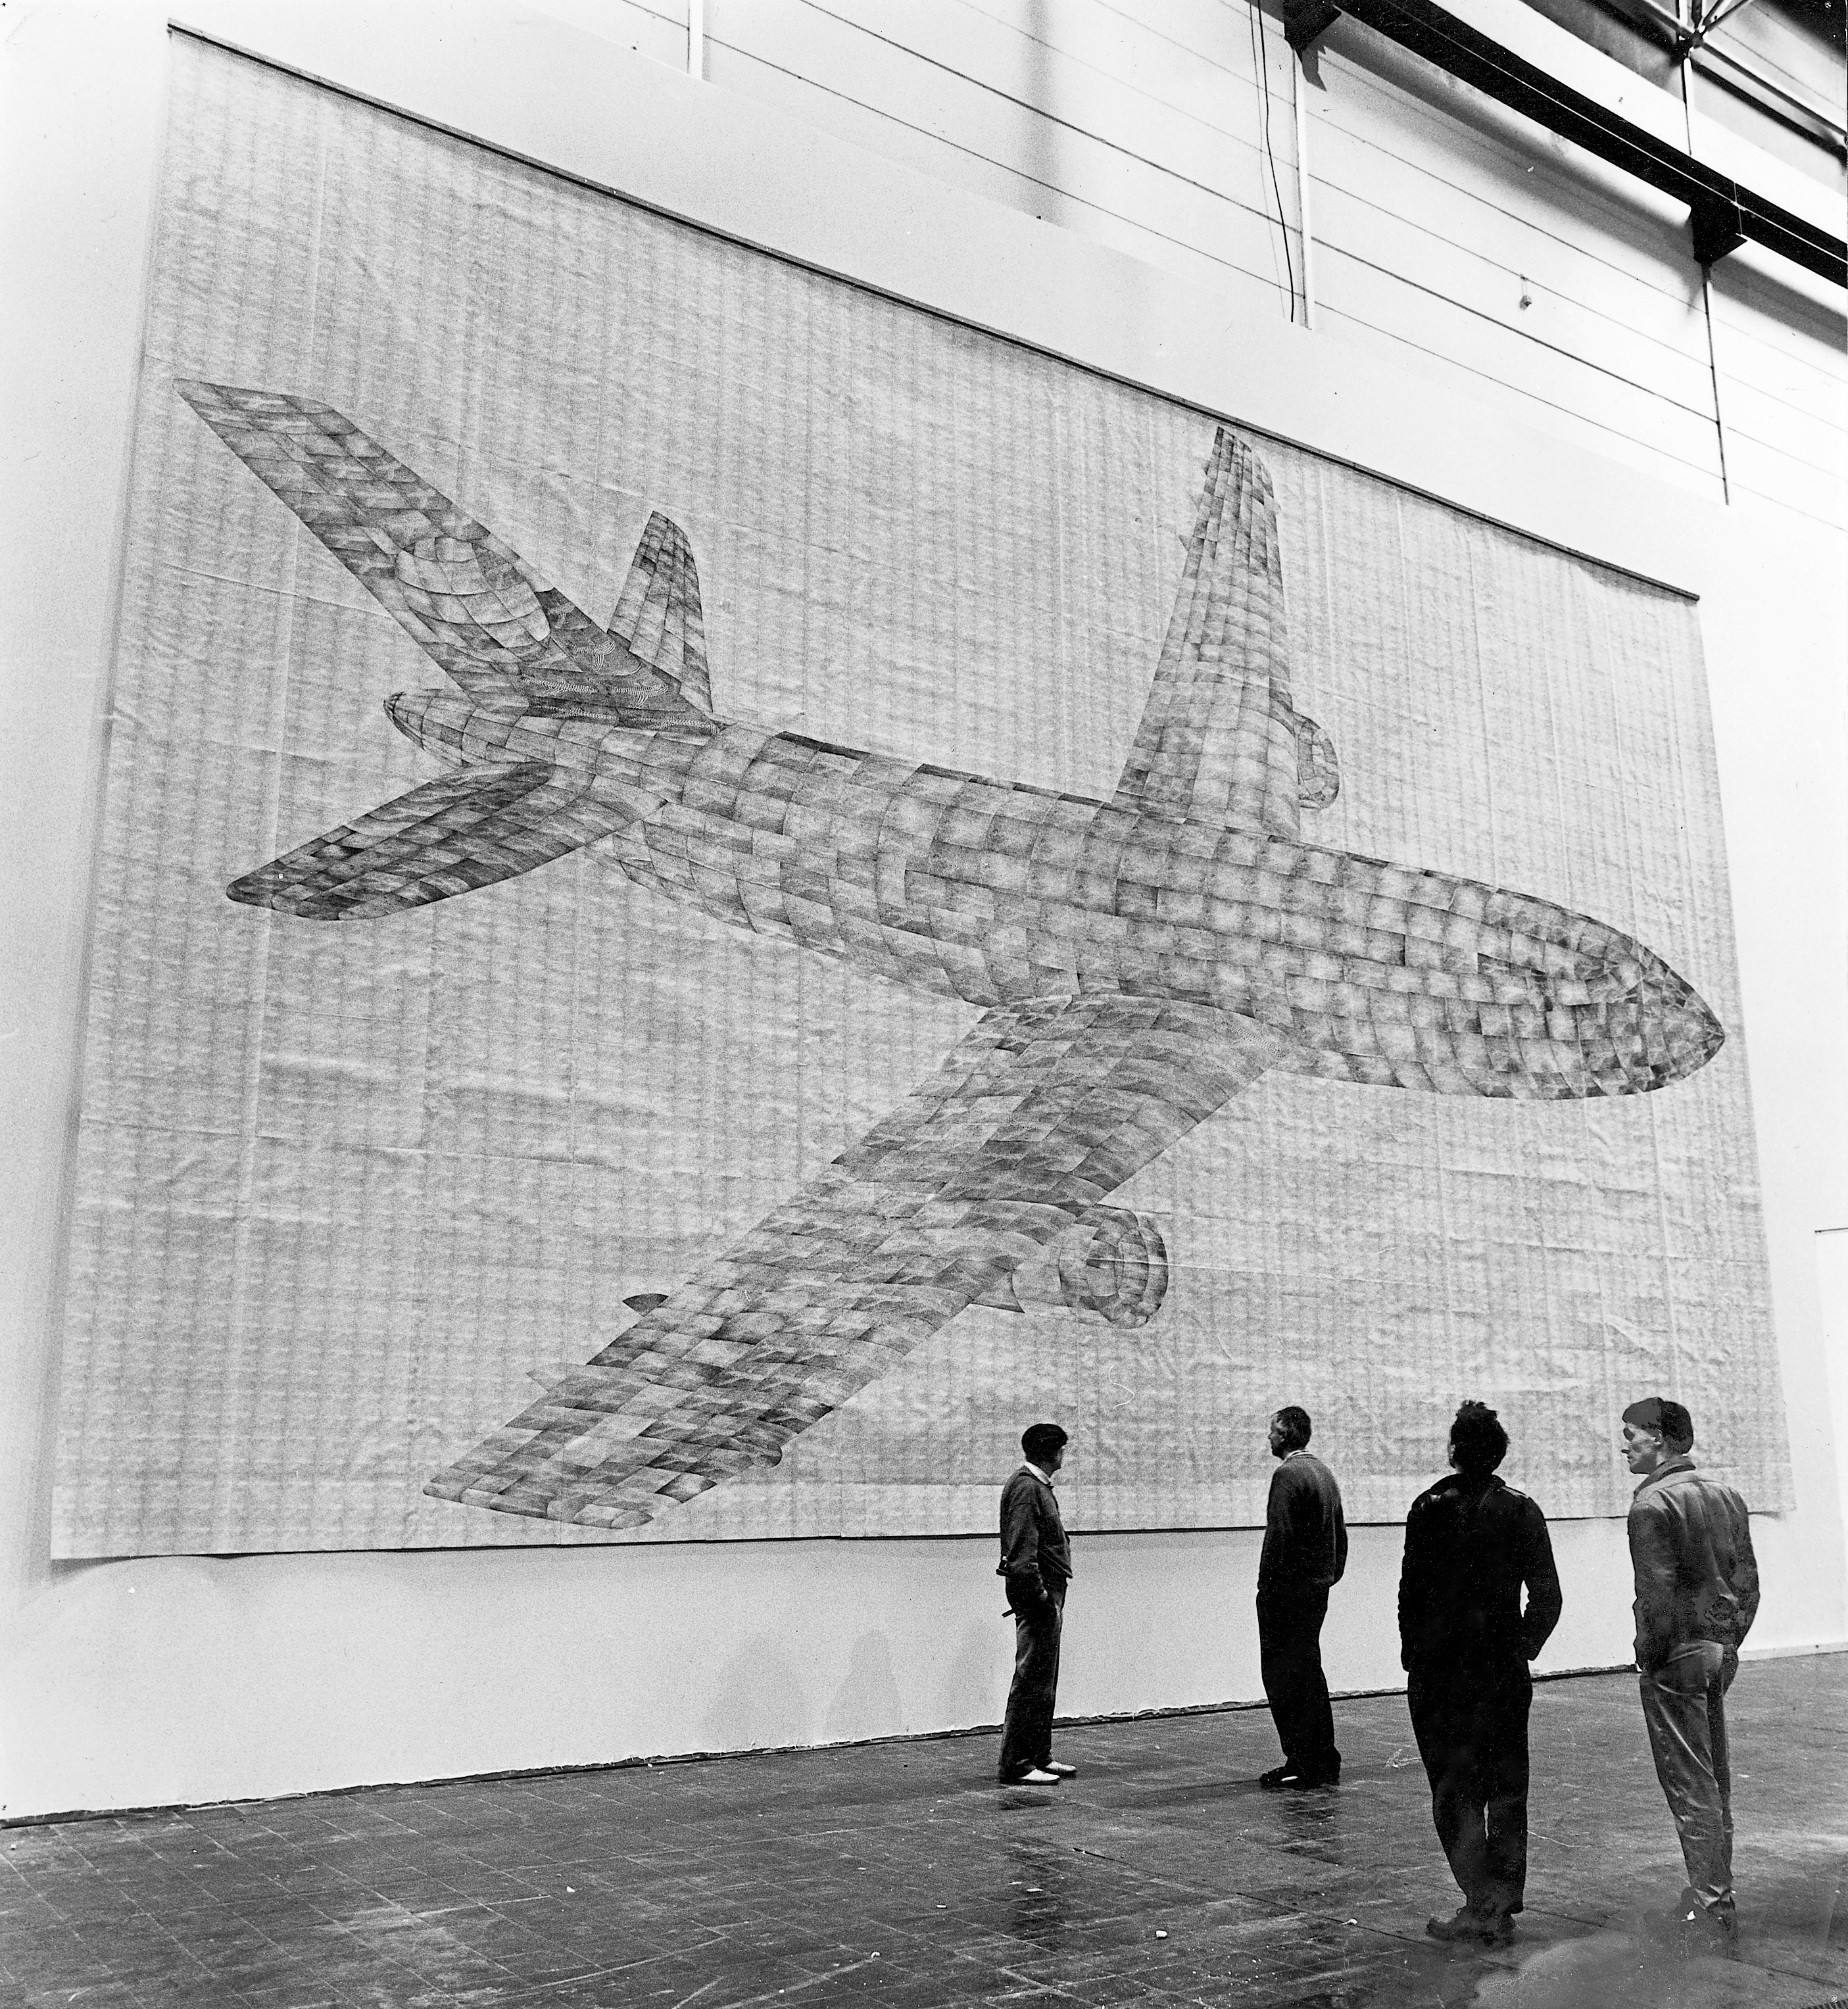 Thomas Bayrle, Flugzeug [Airplane], 1982–83. Photo-collage on paper, 315 x 527 1/2 in (800